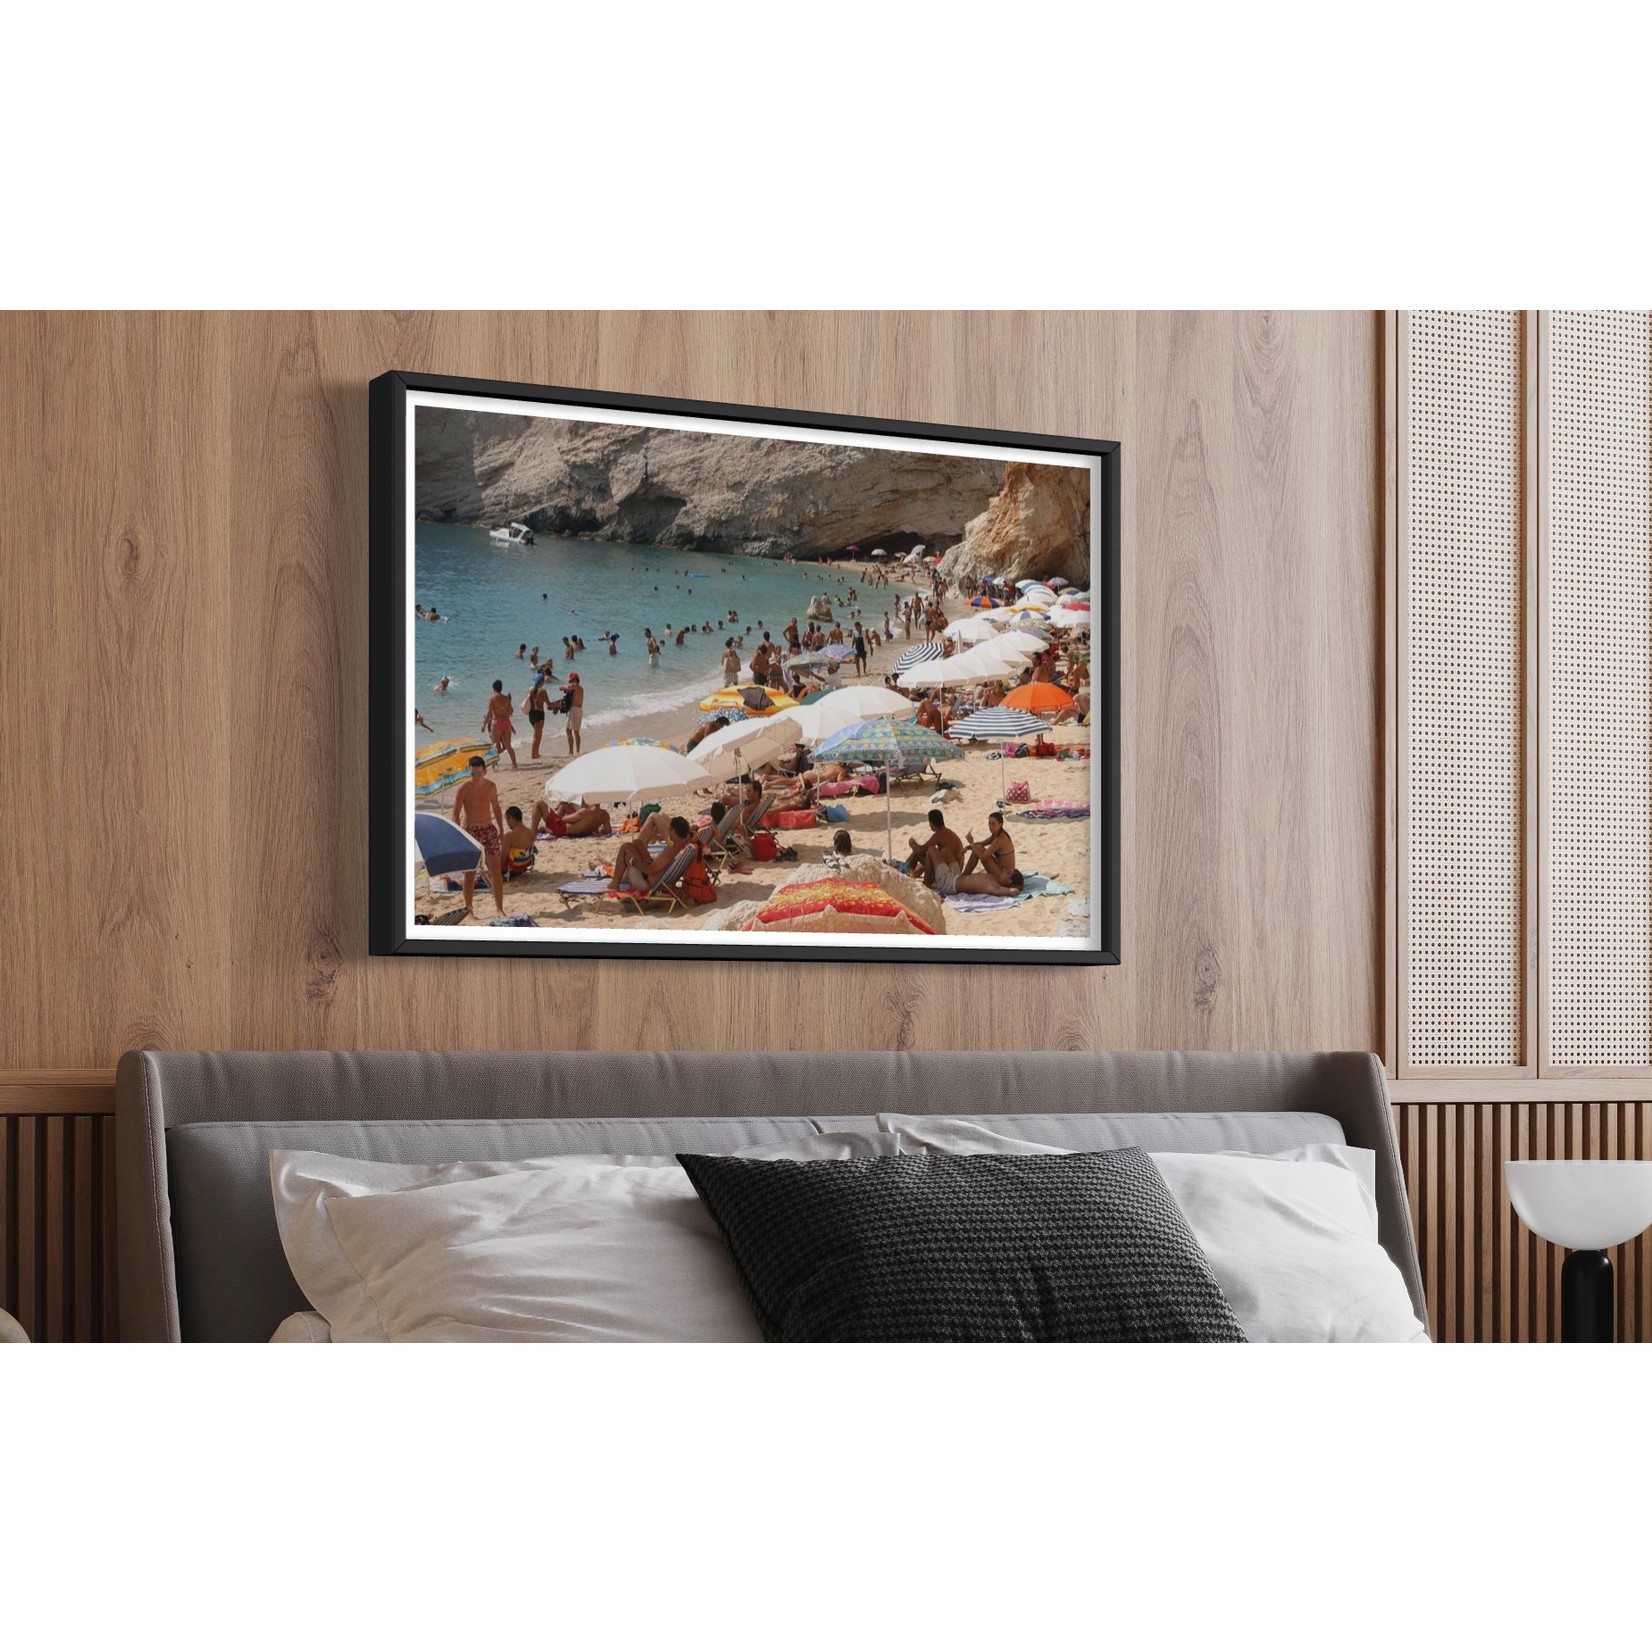 The Picturalist | Fine Art Print on Rag Paper Beaches Draw Summer Tourists To Lefkada Island by Sean Gallup via Getty Images Gallery